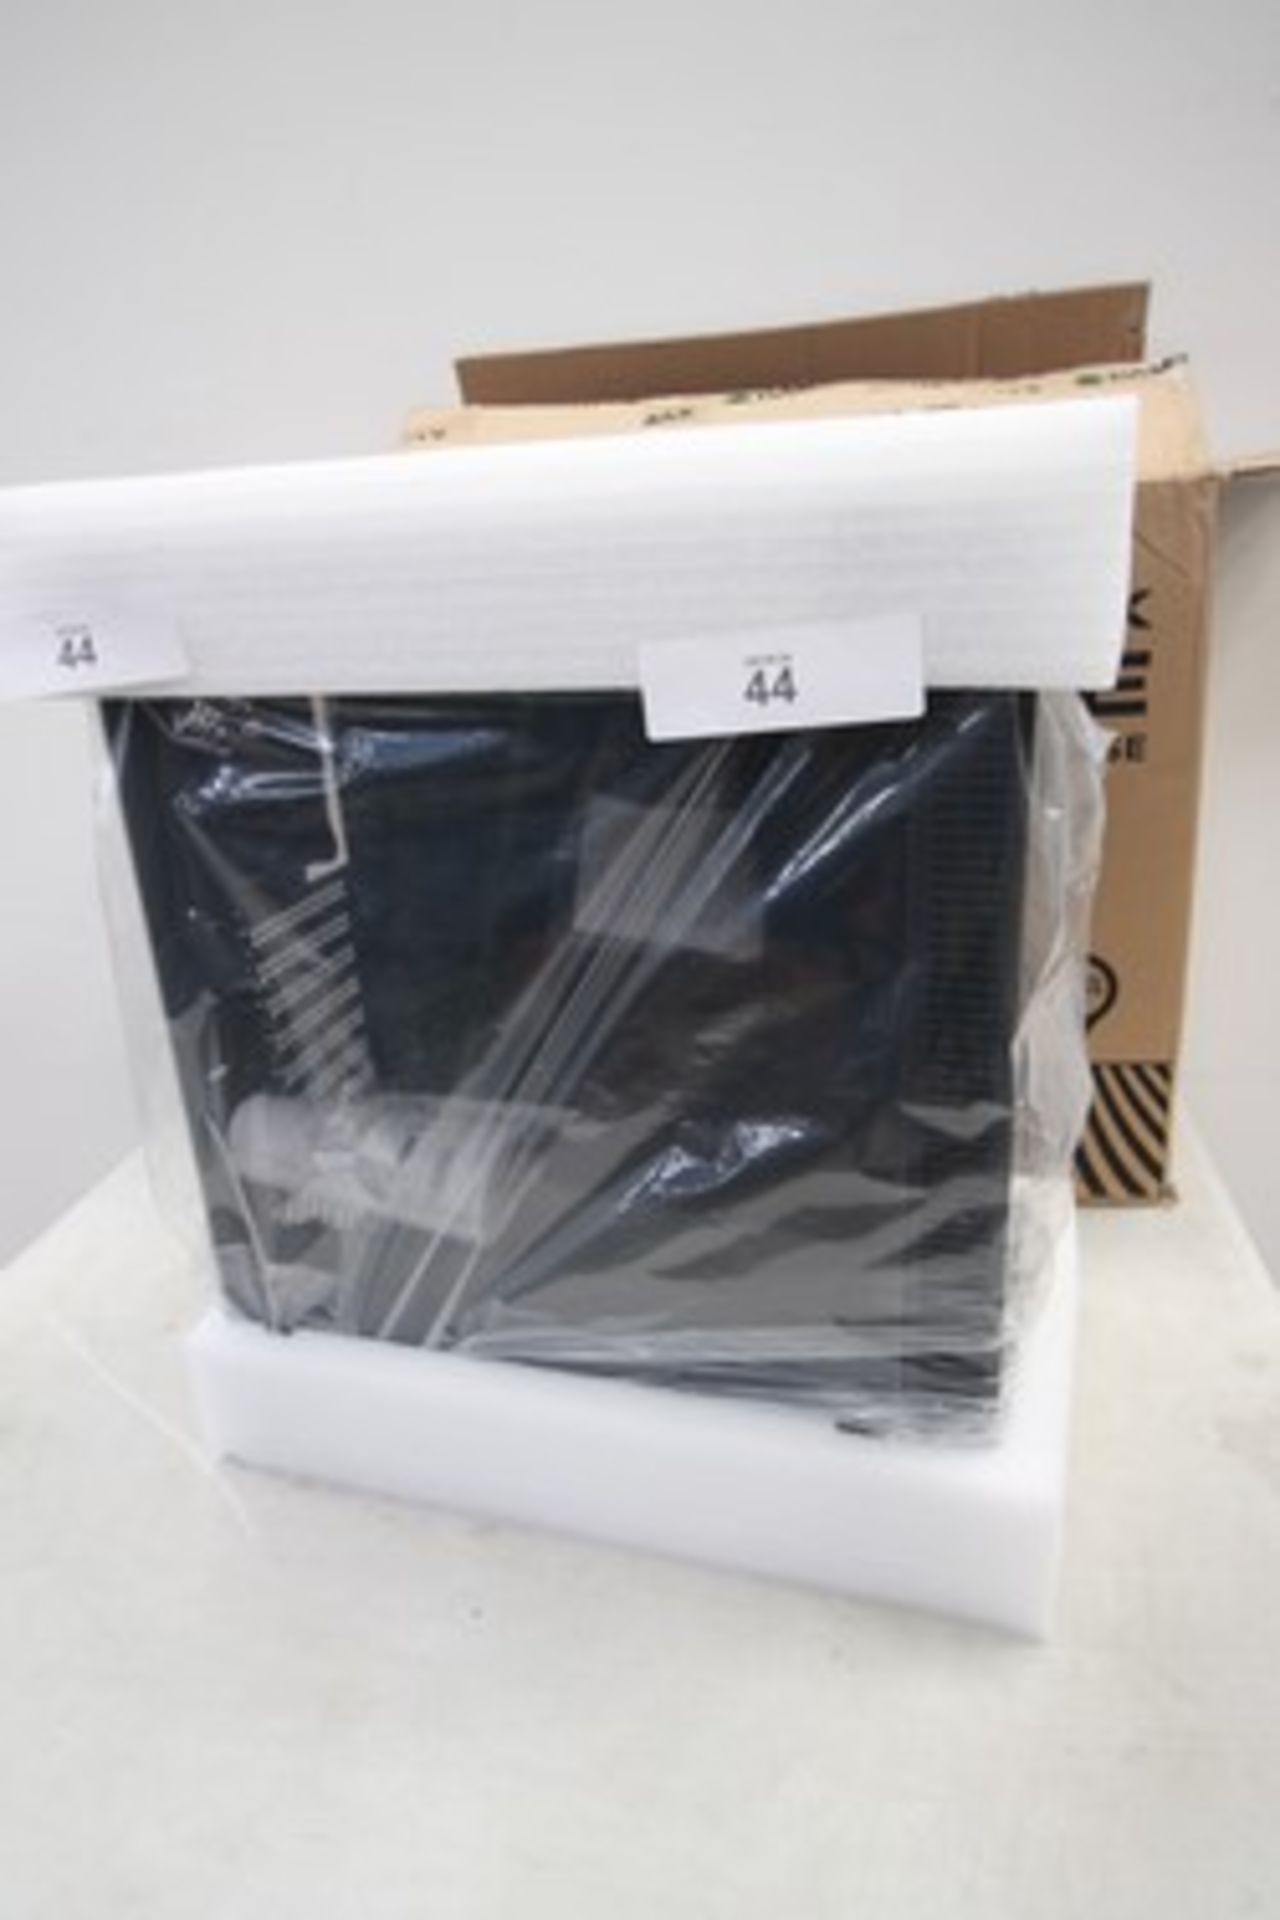 1 x Game Max black hole mid tower PC case, model: 3603-TB - new in box (ES2)